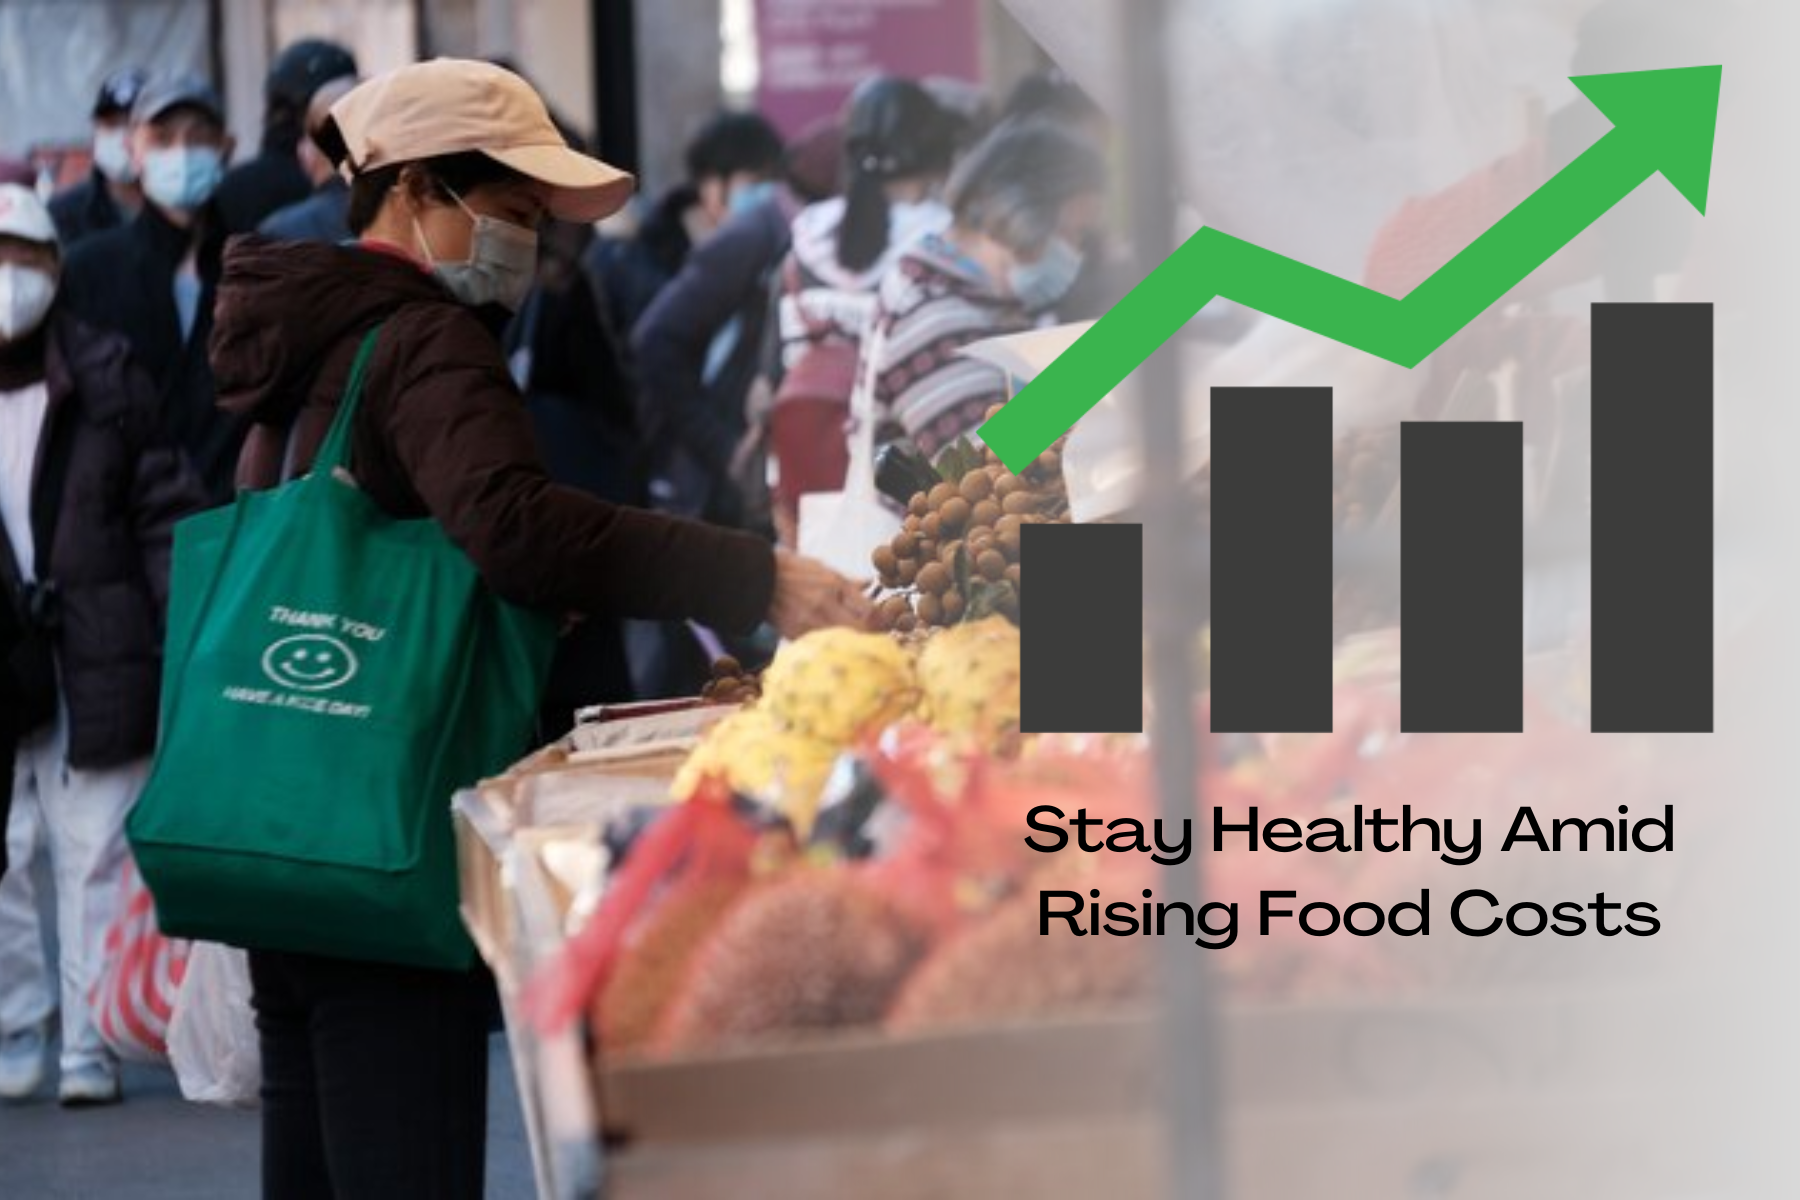 Stay Healthy Amid Rising Food Costs - Keys To Practical Buying And A Healthy Living